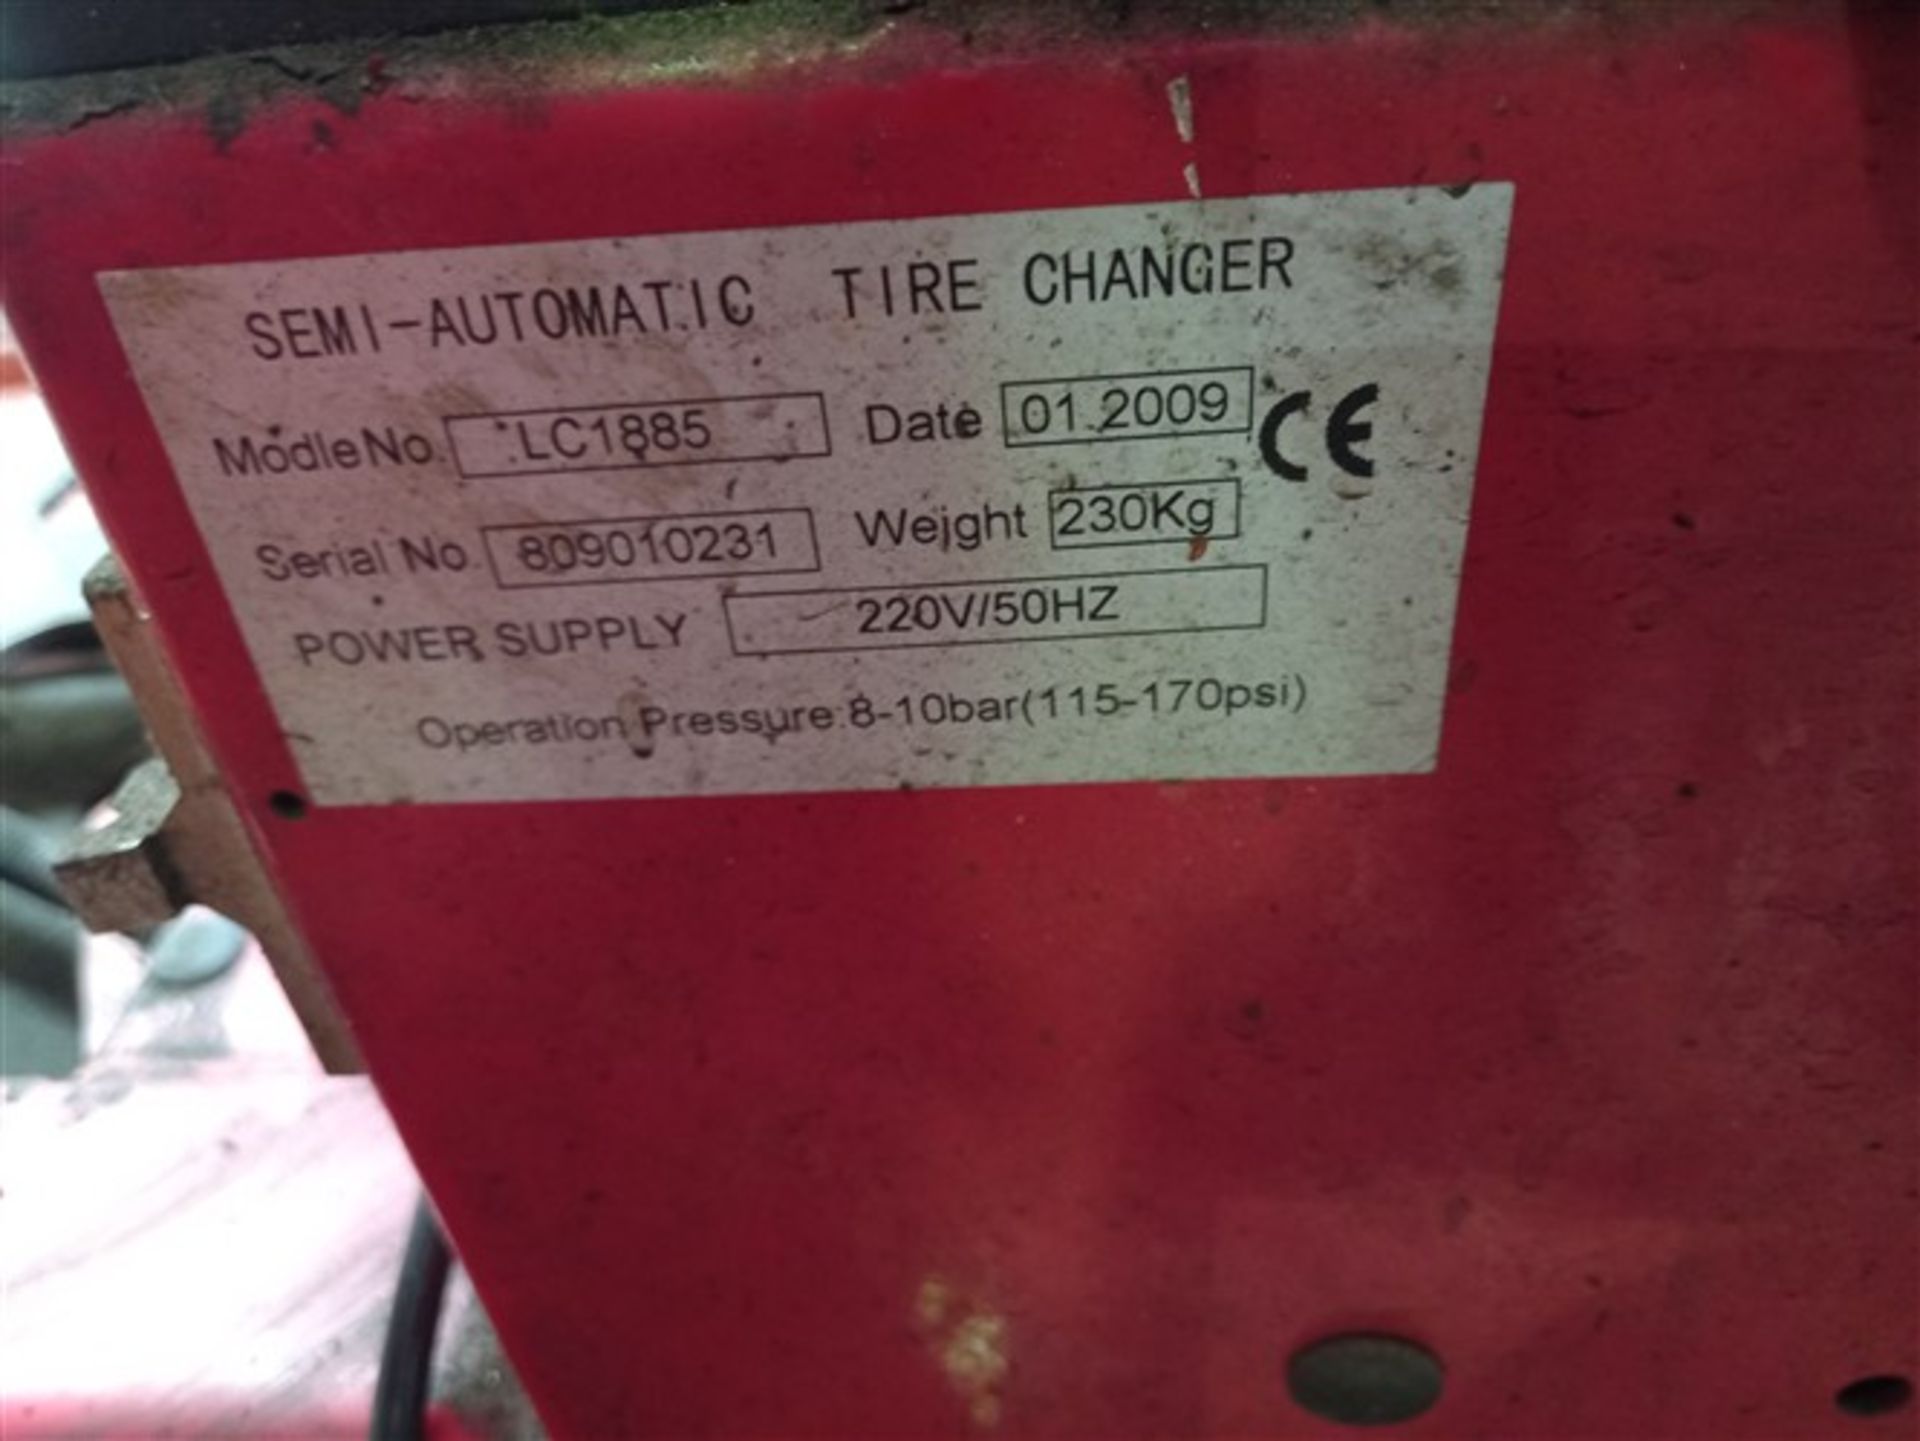 Semi-automatic LC1885 tyre changer Serial no. 809010231 (2009) - Image 2 of 2